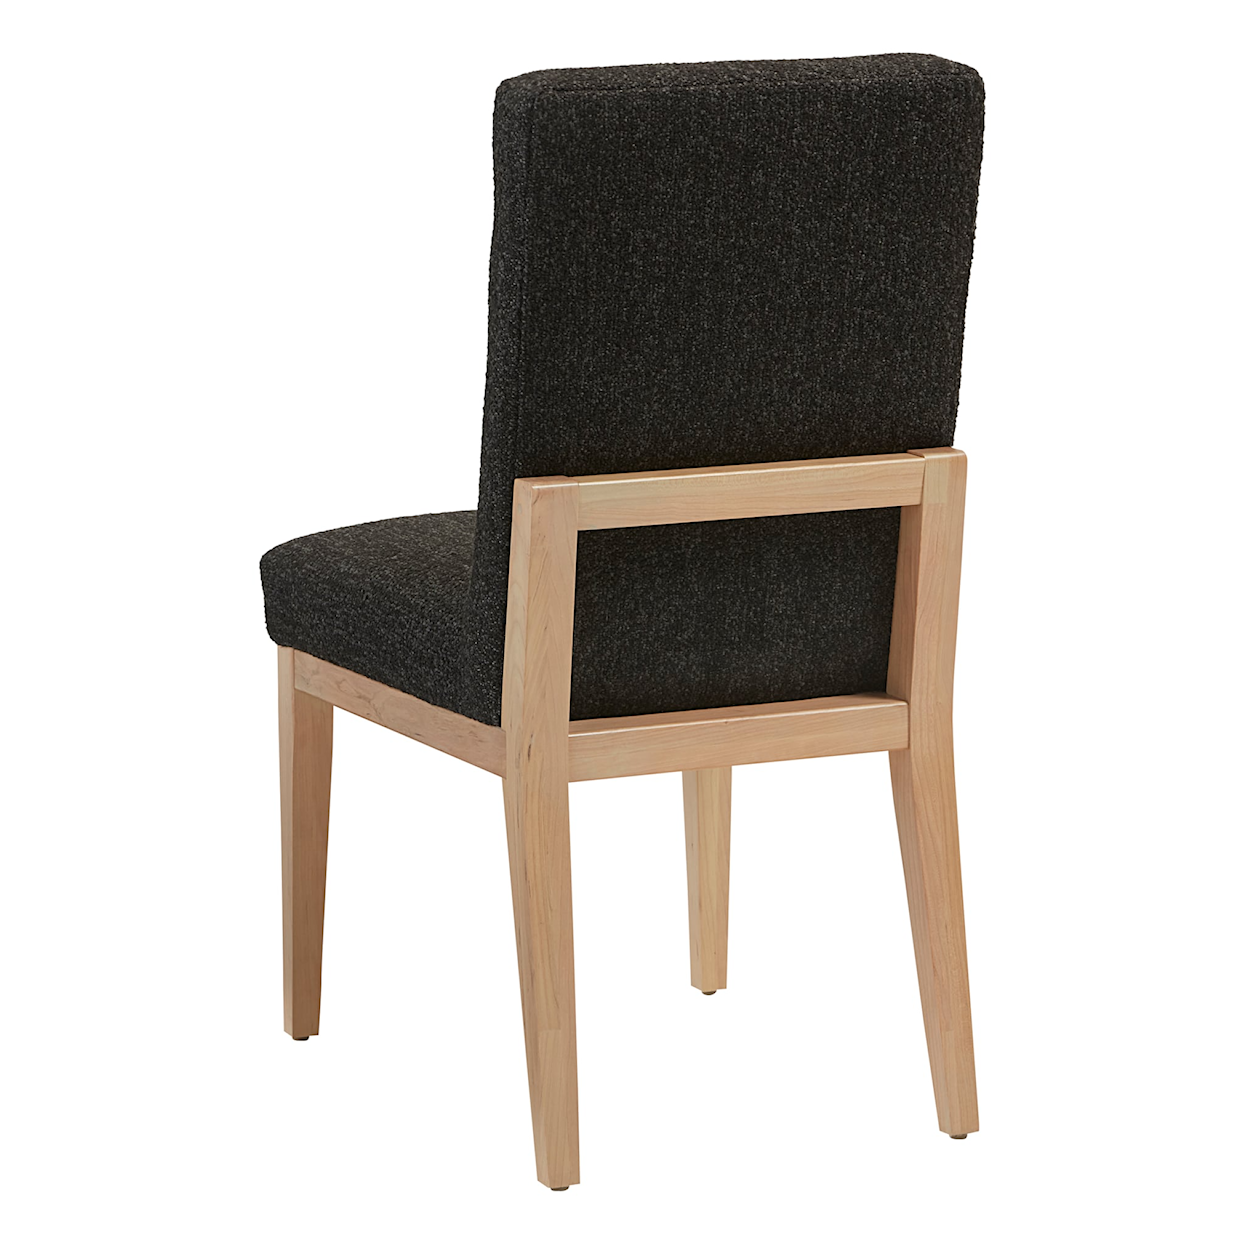 Vaughan Bassett Crafted Cherry - Bleached Upholstered Side Dining Chair